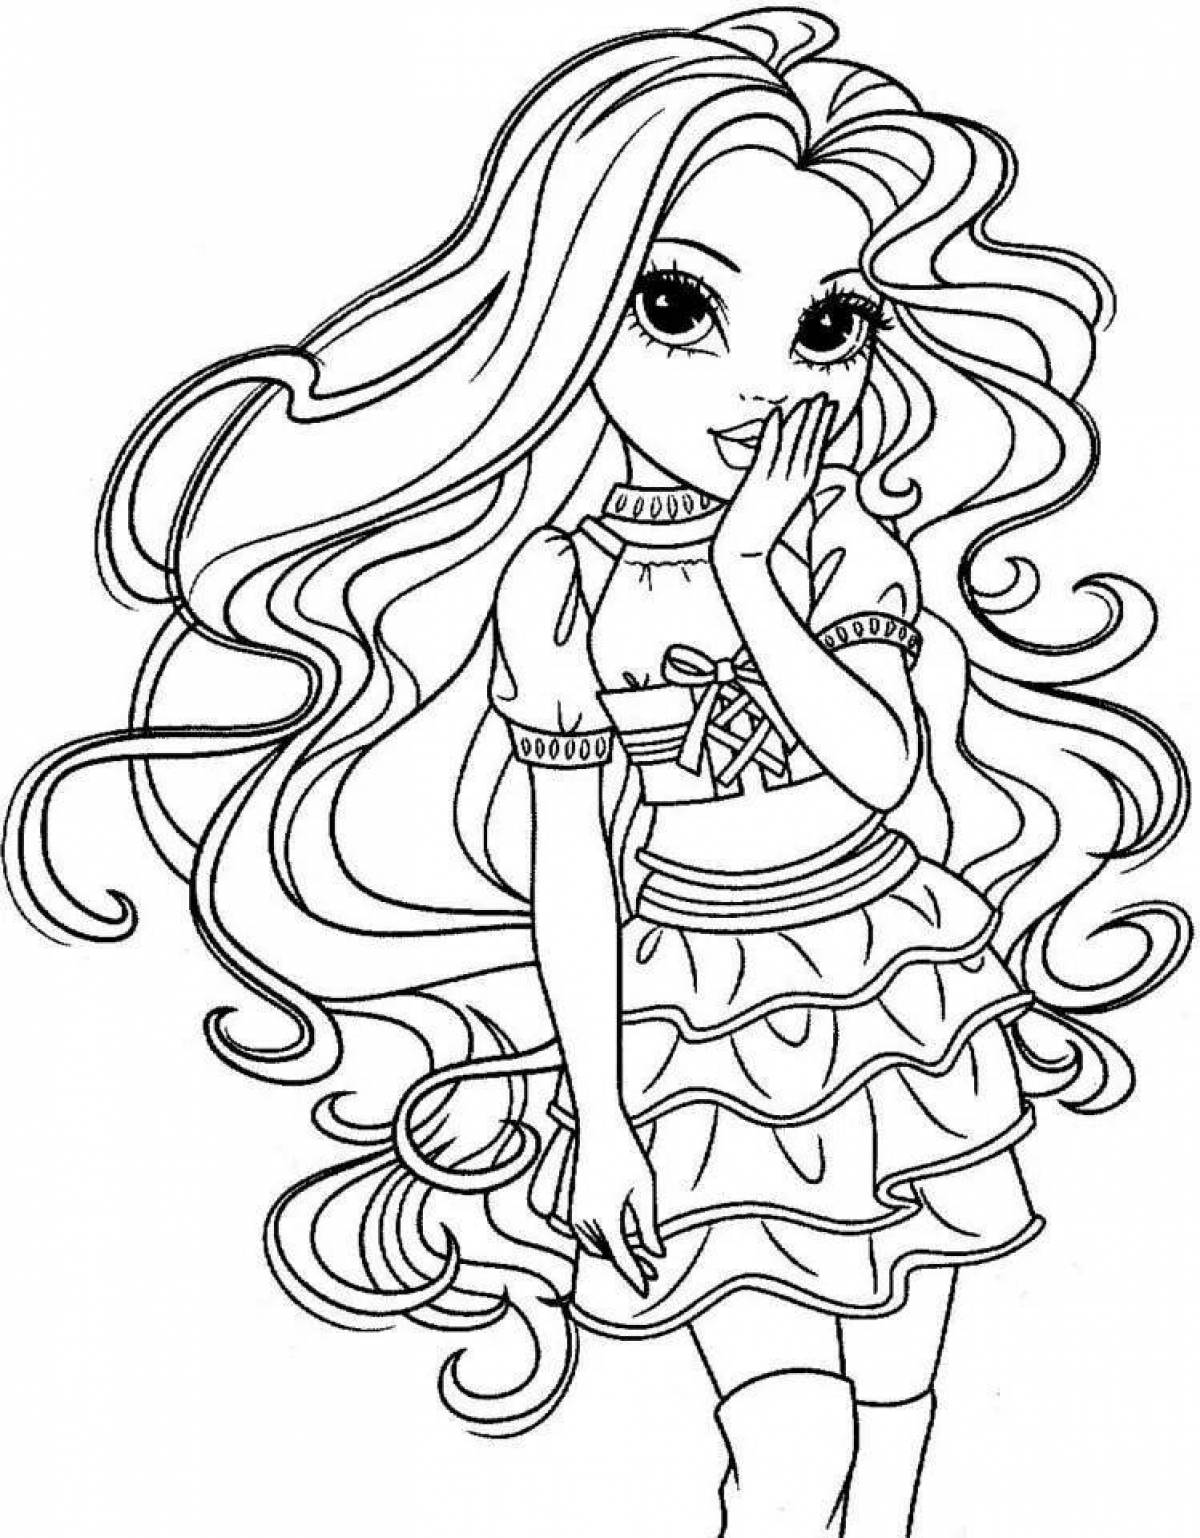 Bright girly coloring book